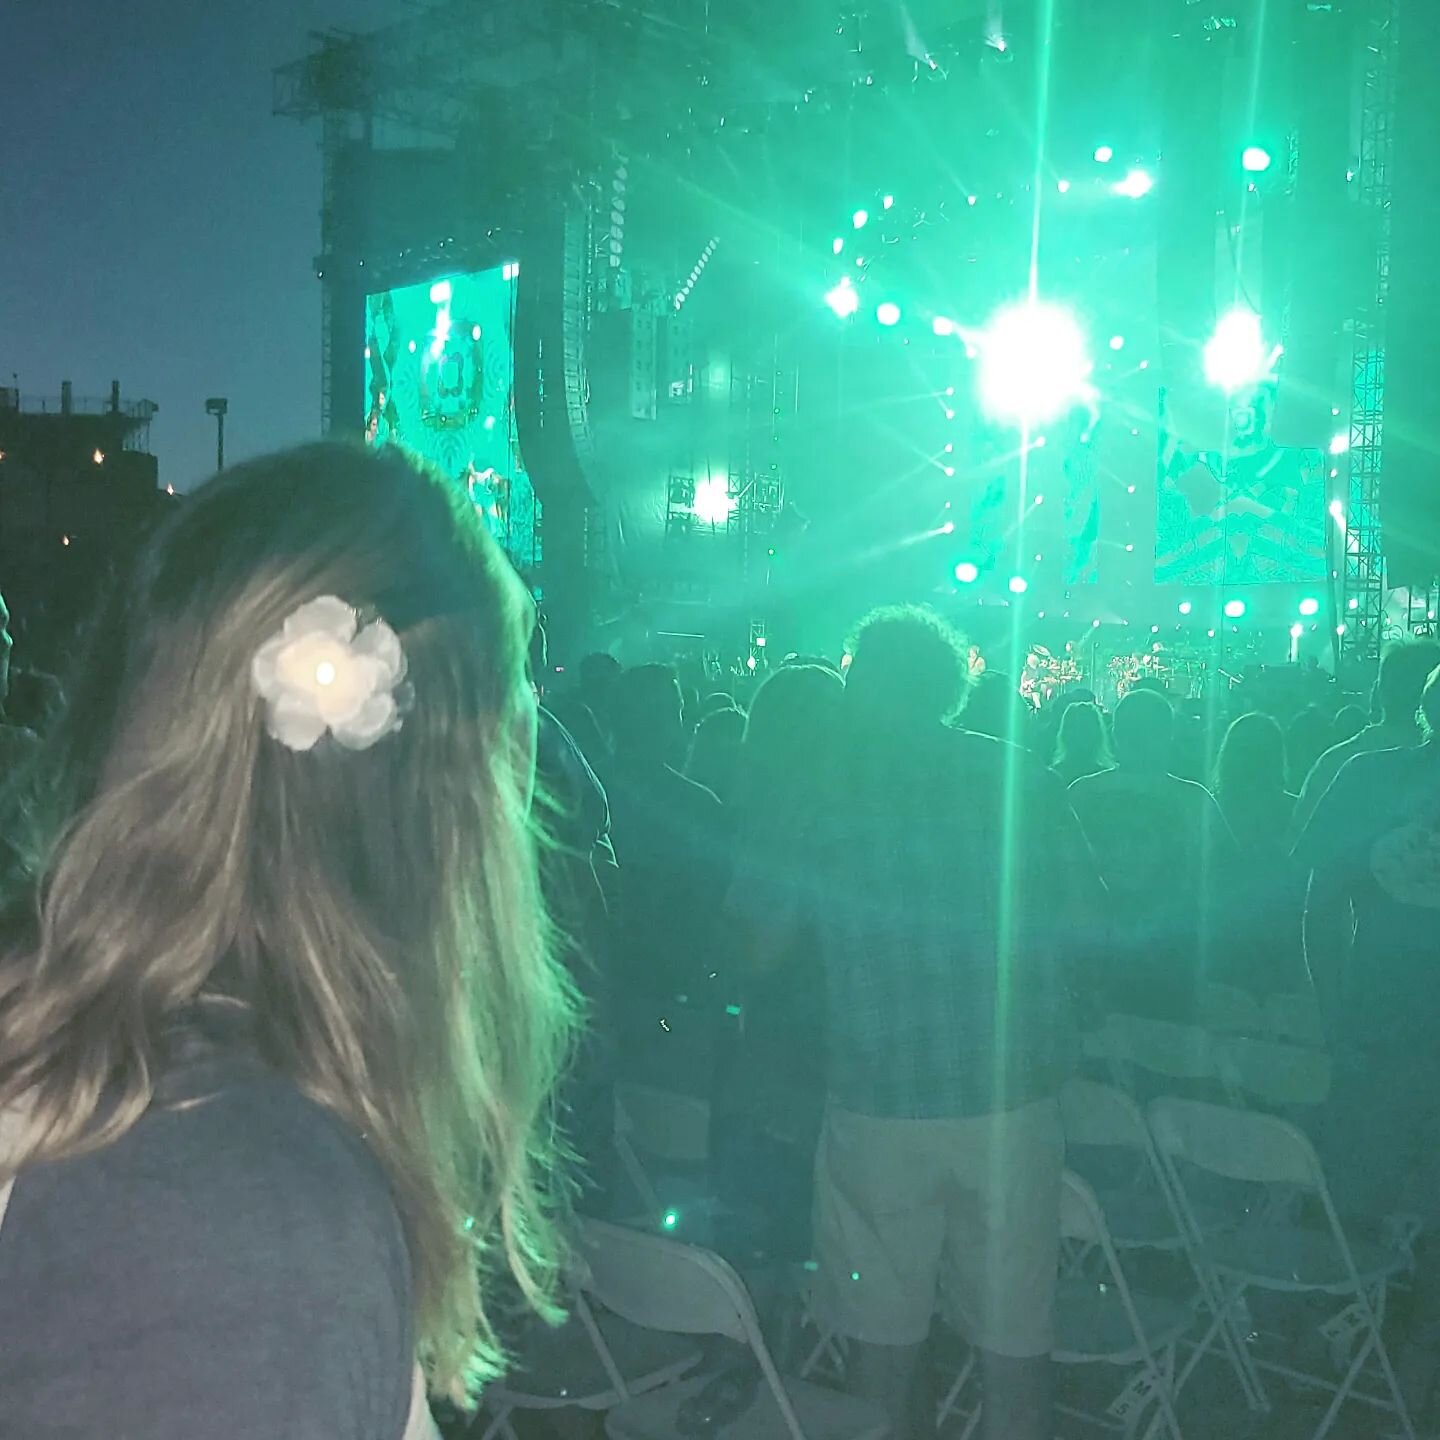 Don't forget your #zuzuflower when heading to a #summerconcert 

Available at Www.zuzuflowers.com in color changing or white

#lightupparty #concertaccessory #hairlights #flowersforhair #lightuprose #chicagoconcerts #hairflowers #summerconcertseries 